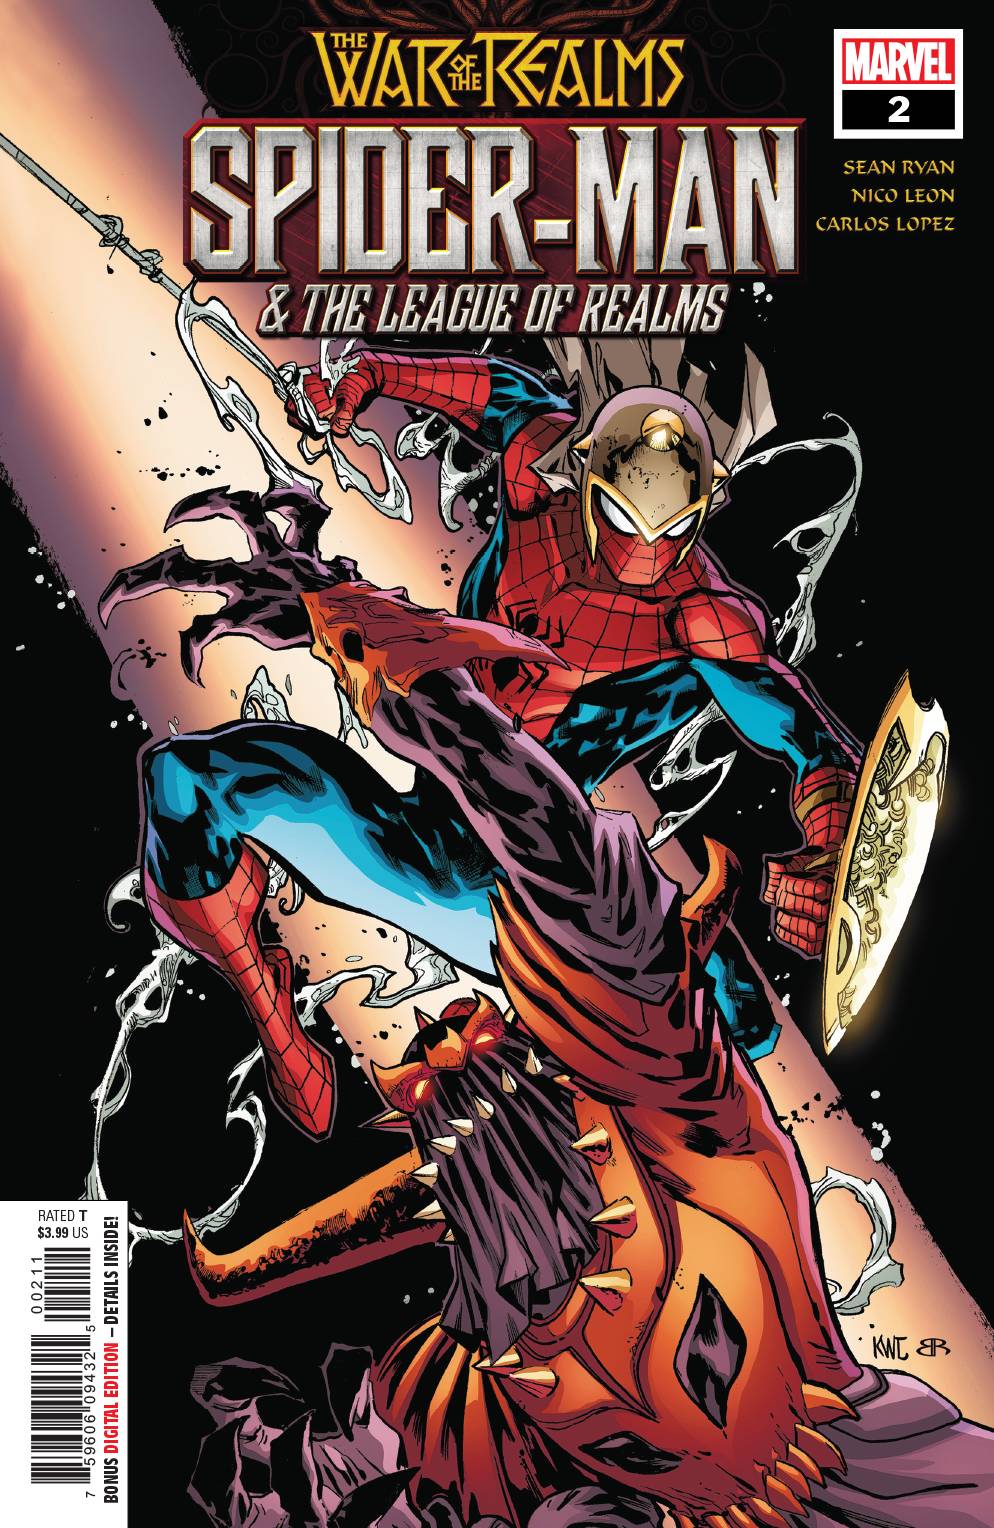 War of Realms Spider-Man & League of Realms #2 (Of 3)